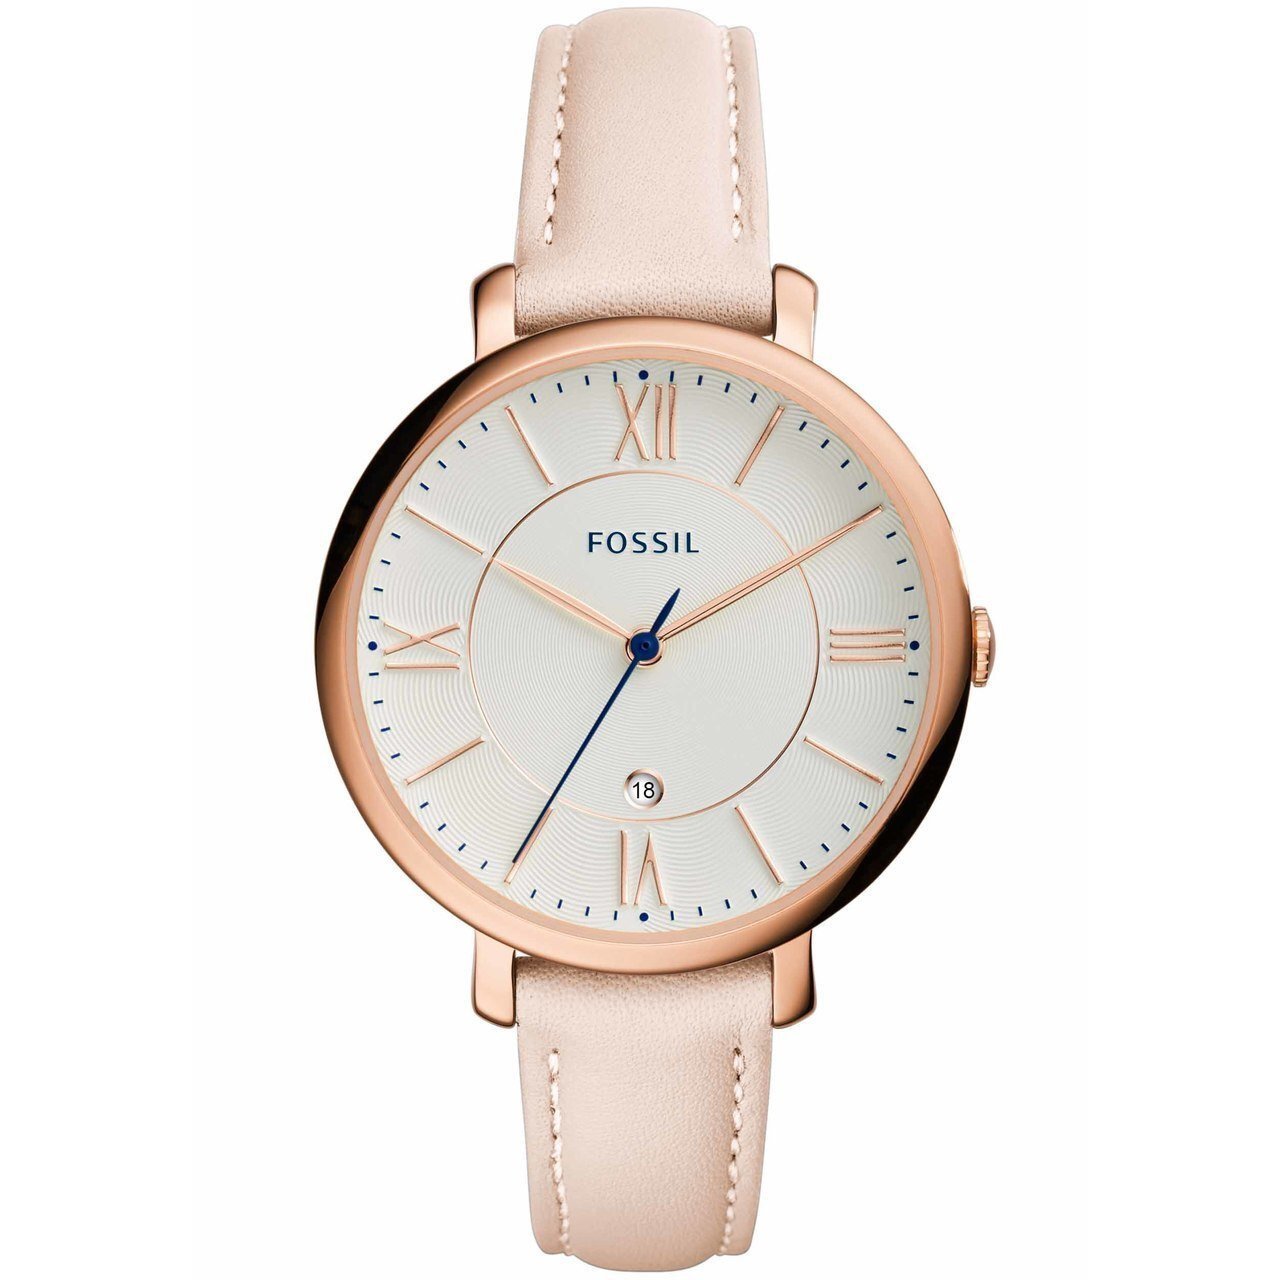 Fossil Jacqueline Rose Gold Blush Leather